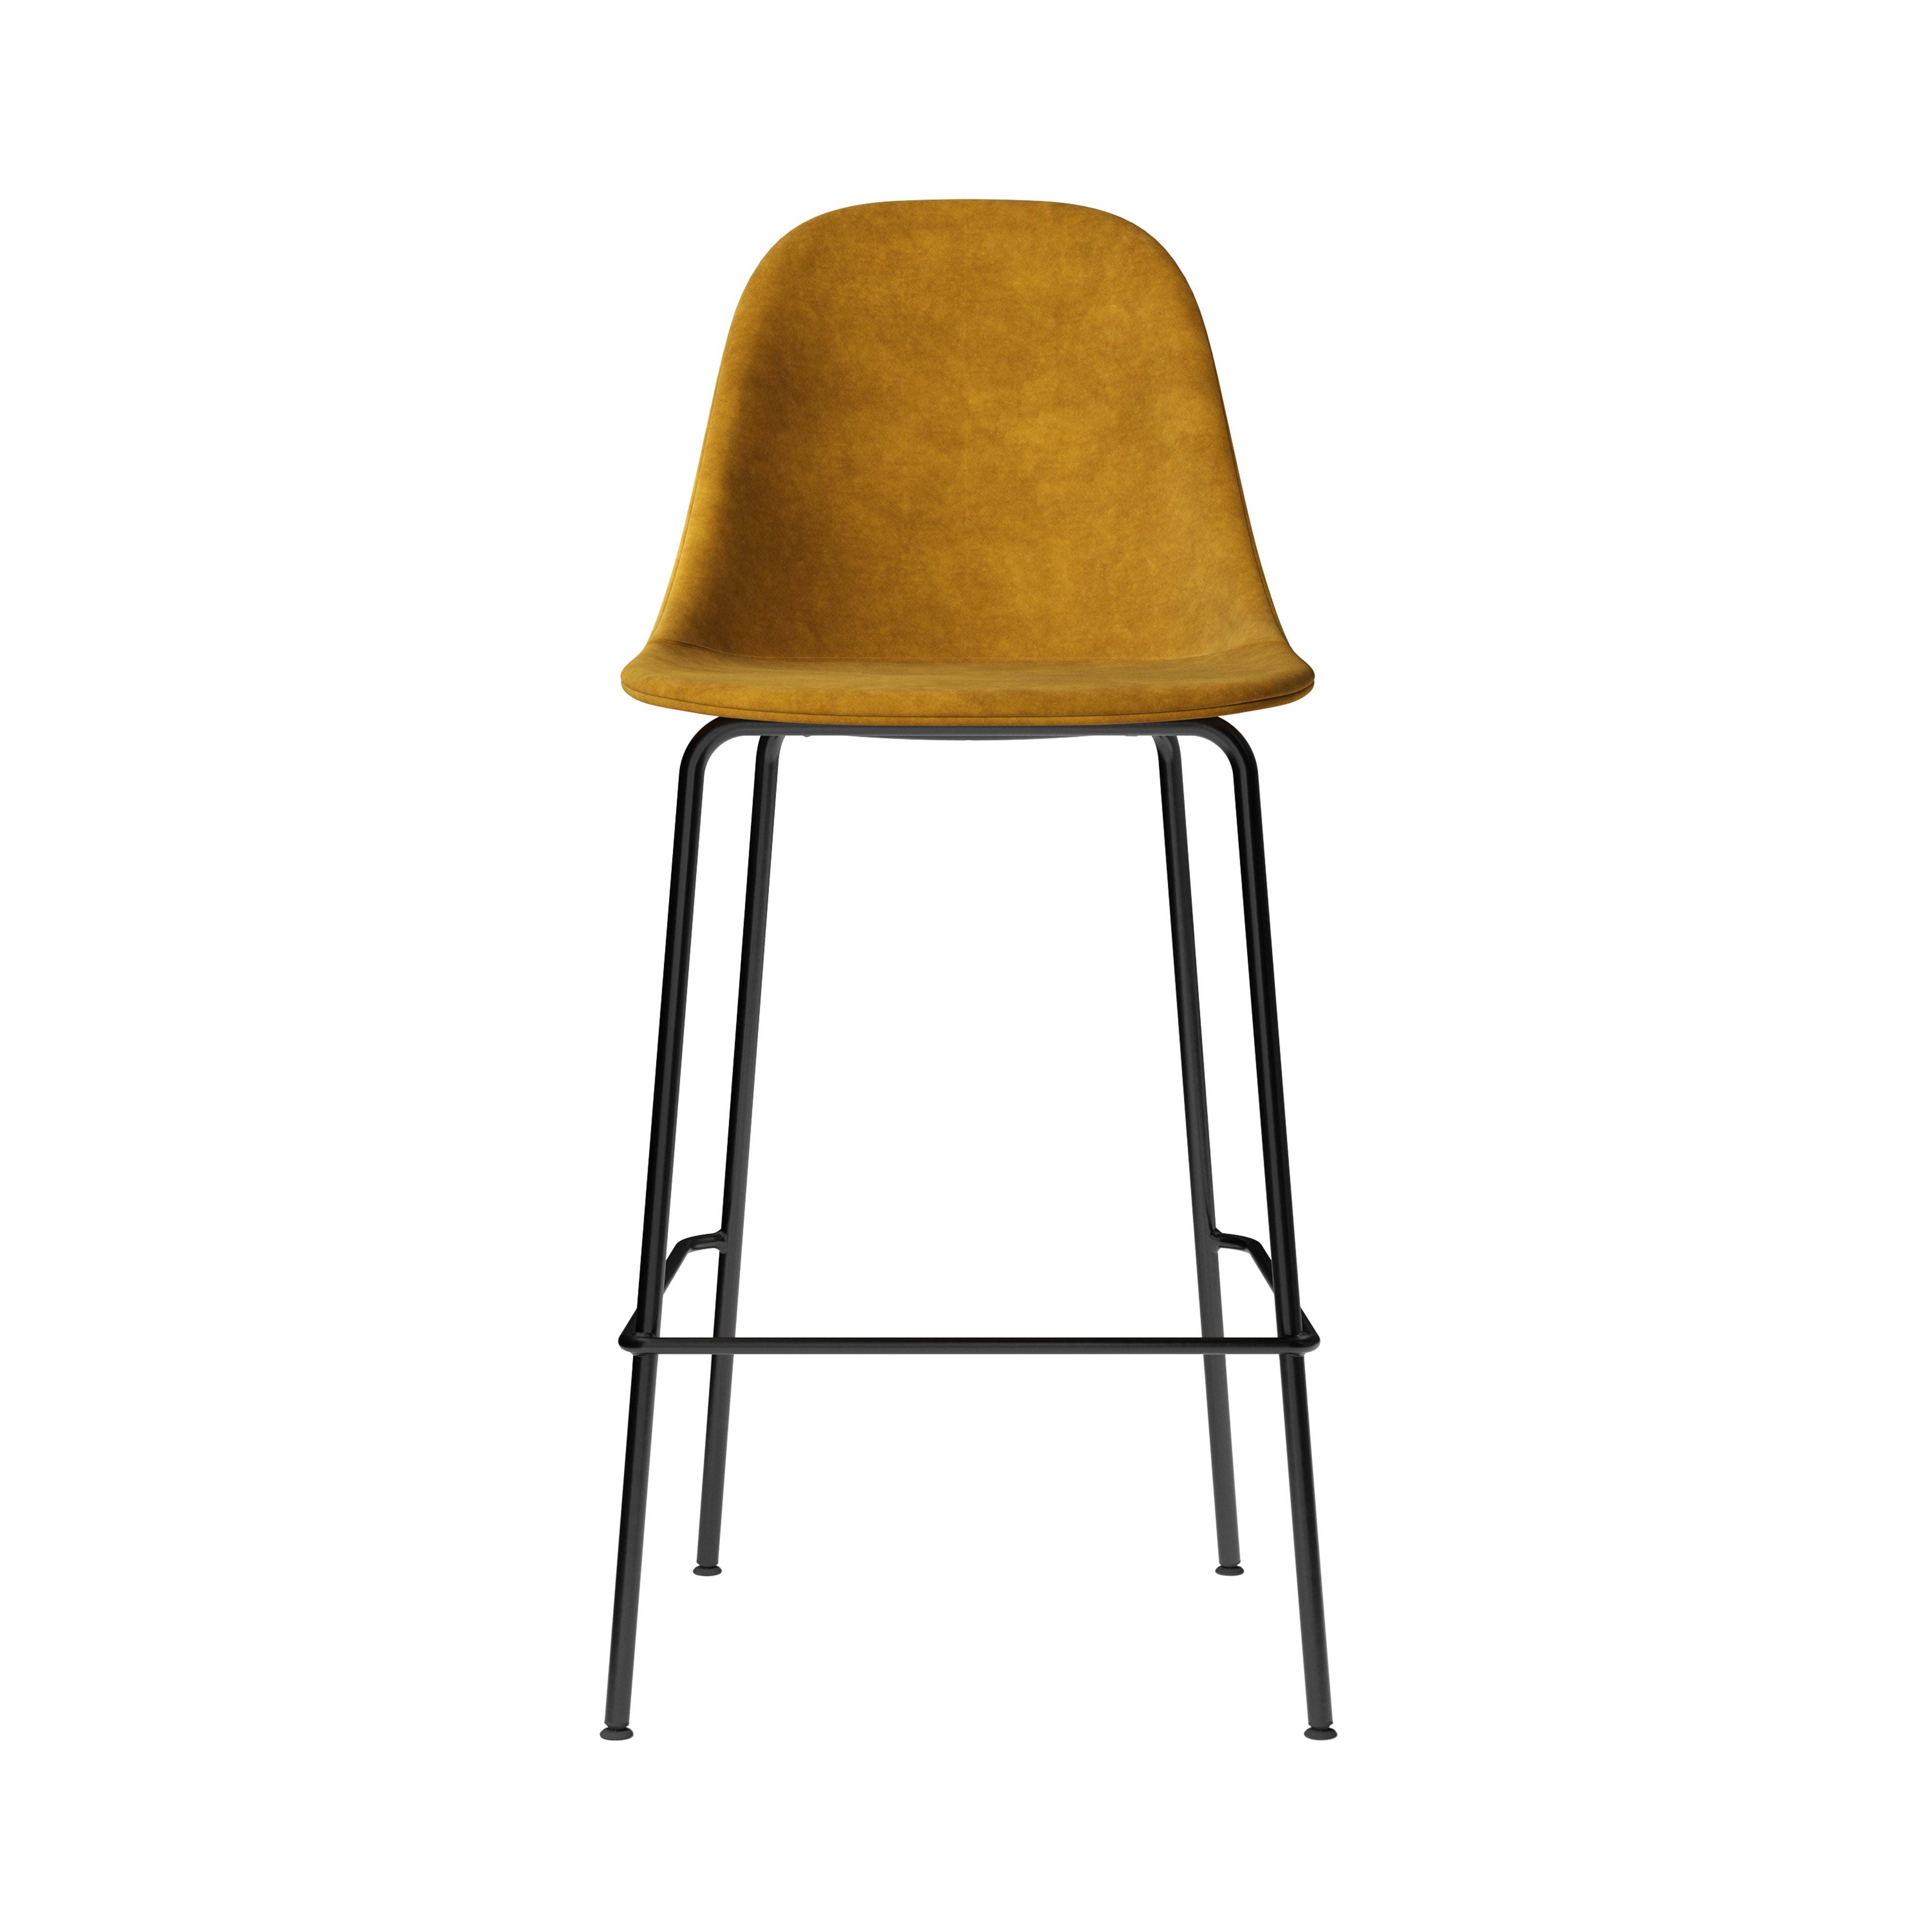 Harbour Bar + Counter Side Chair: Steel Base Upholstered + Bar + Champion 041